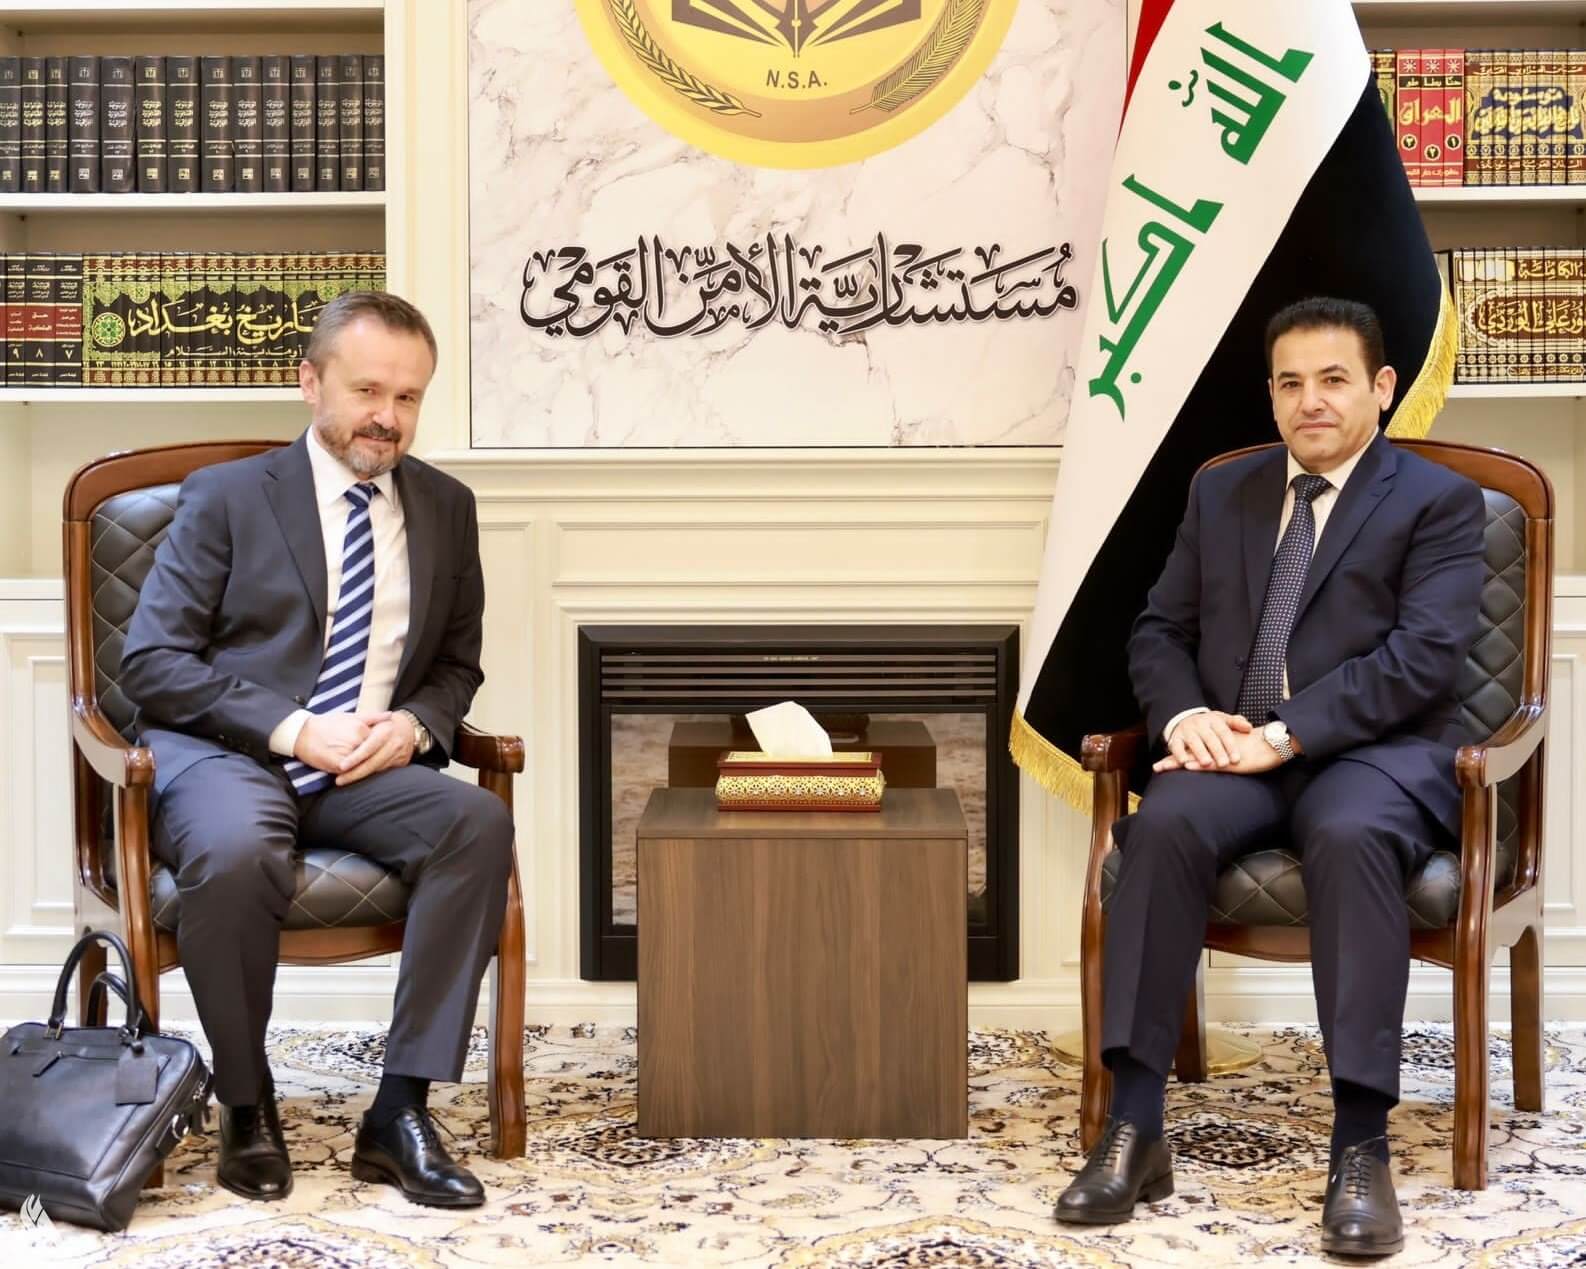 National Security Adviser discusses security issues with Turkey Iraqi